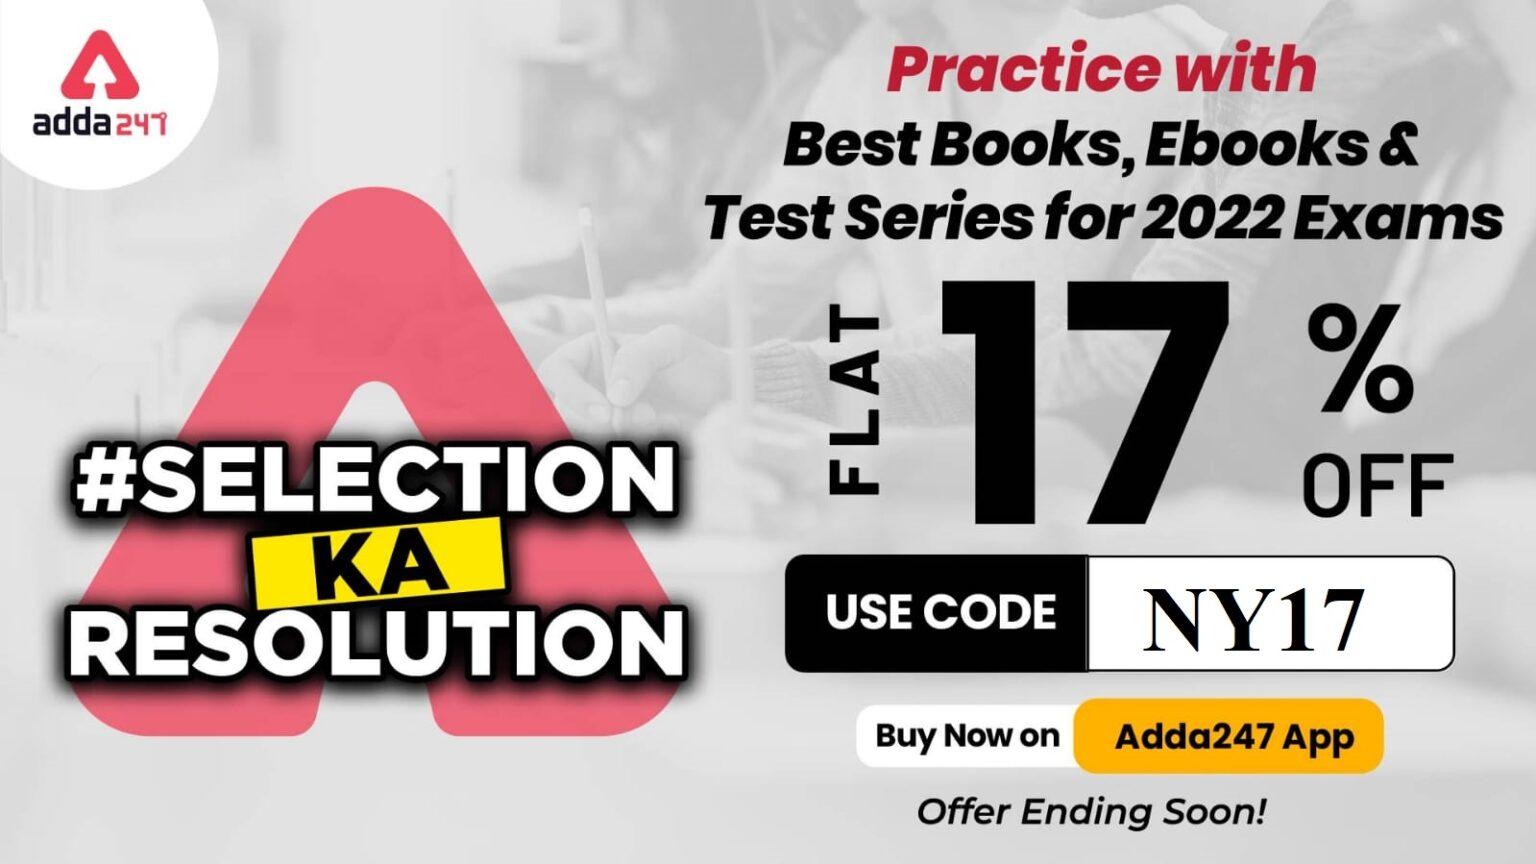 New Year Selection Ka Resolution Offer On Books, E-books, Test series